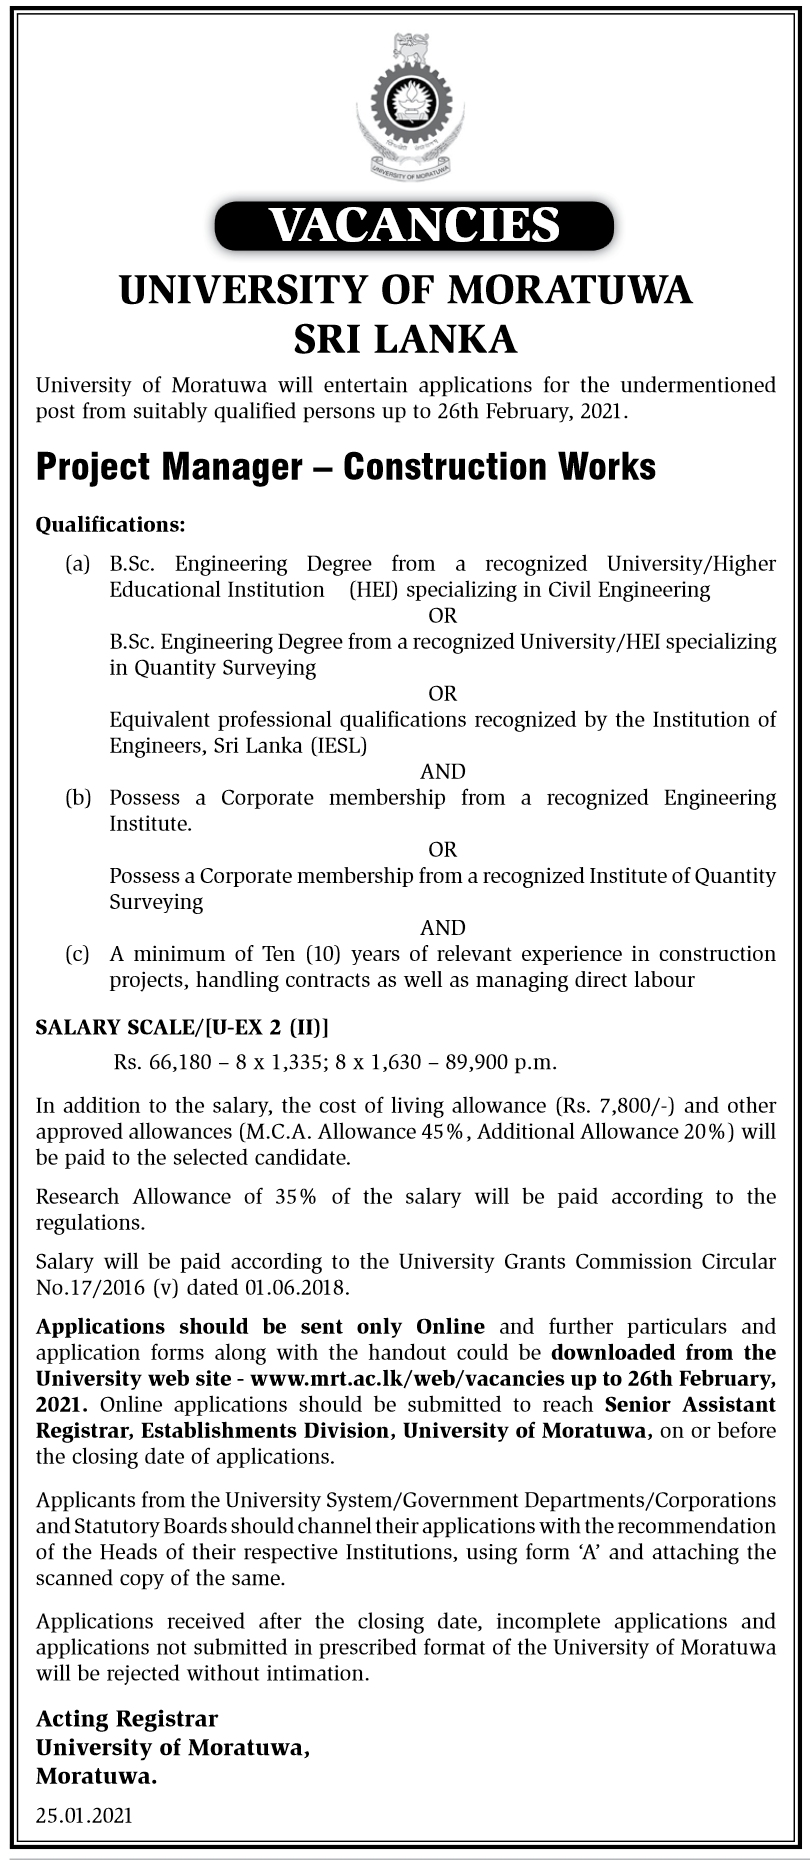 Project Manager (Construction Works) – University of Moratuwa